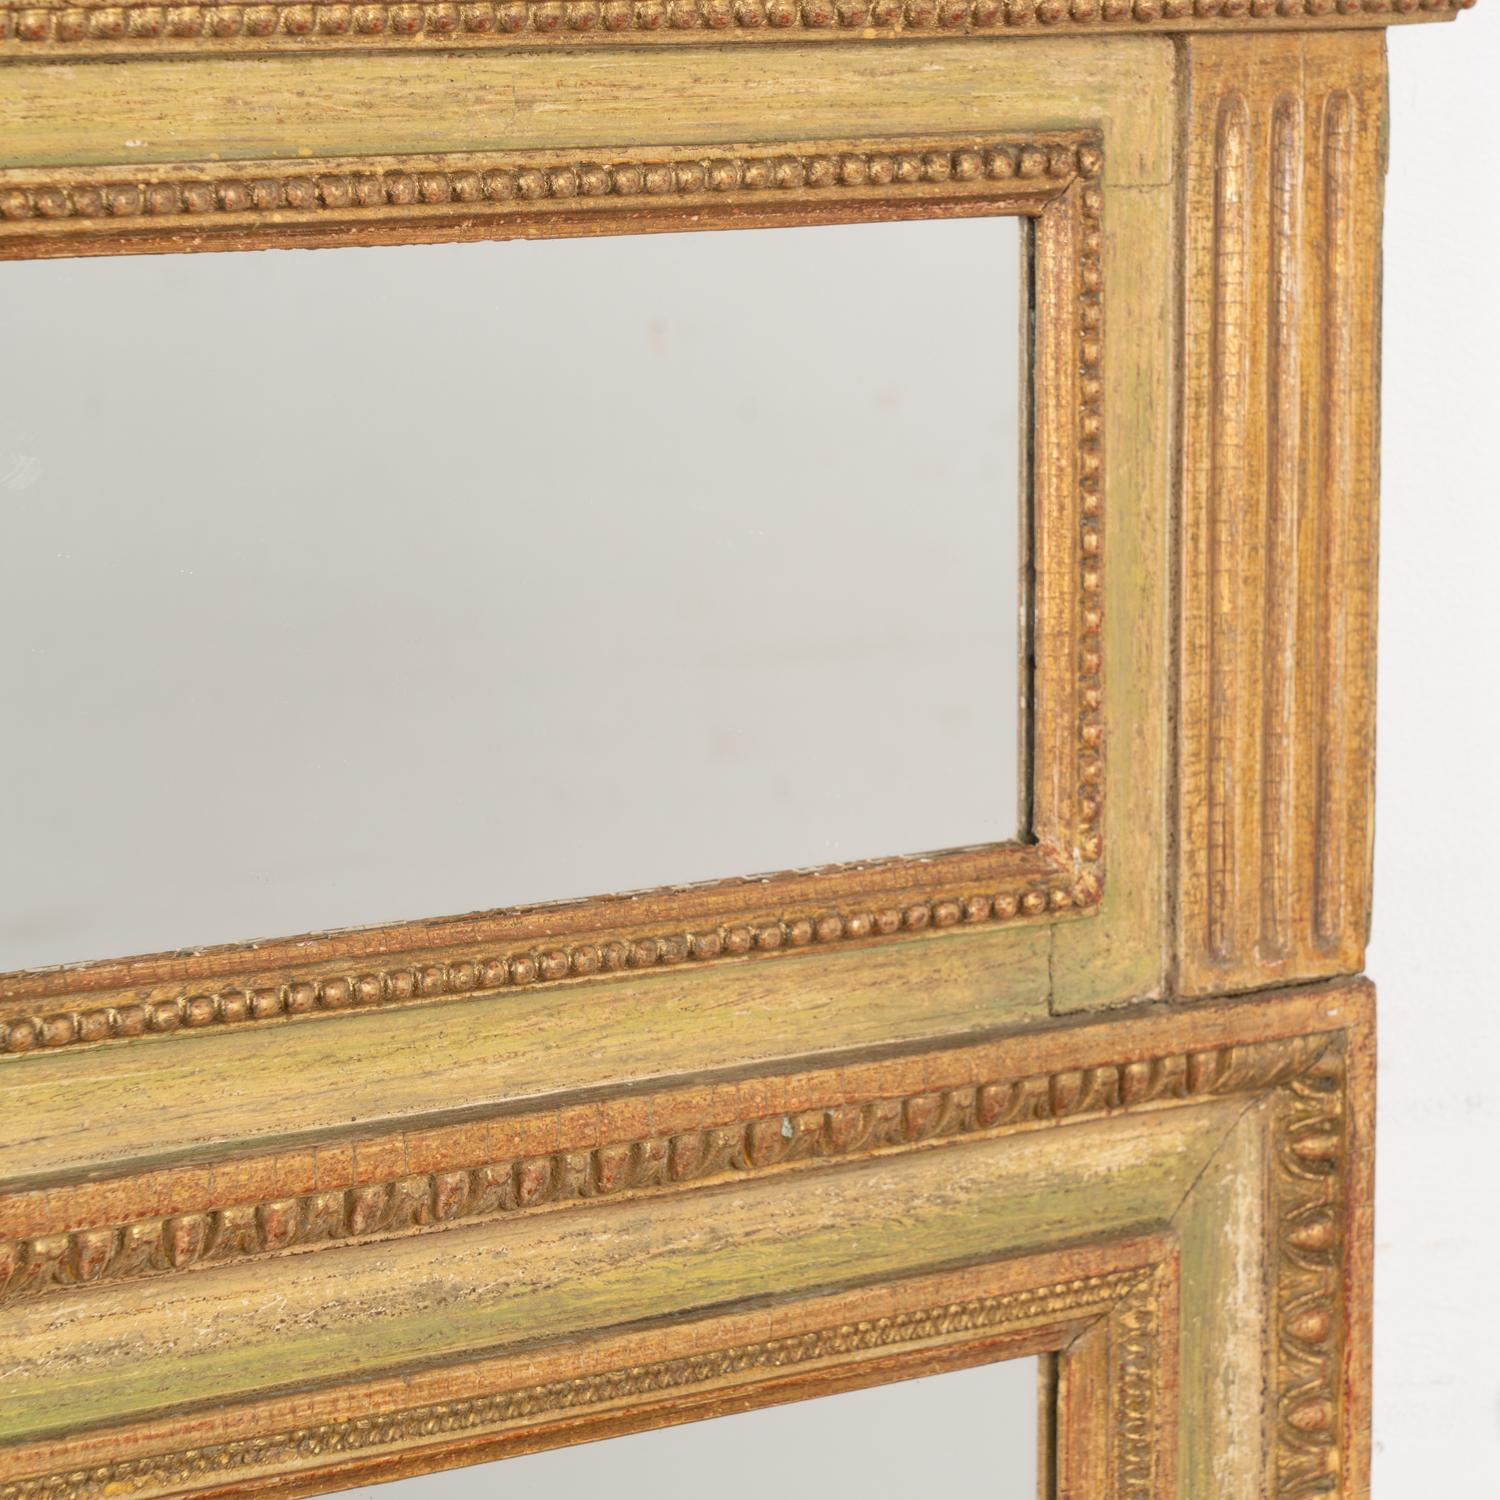 Gold and Green Painted Trumeau Mirror, Sweden circa 1820-40 For Sale 1